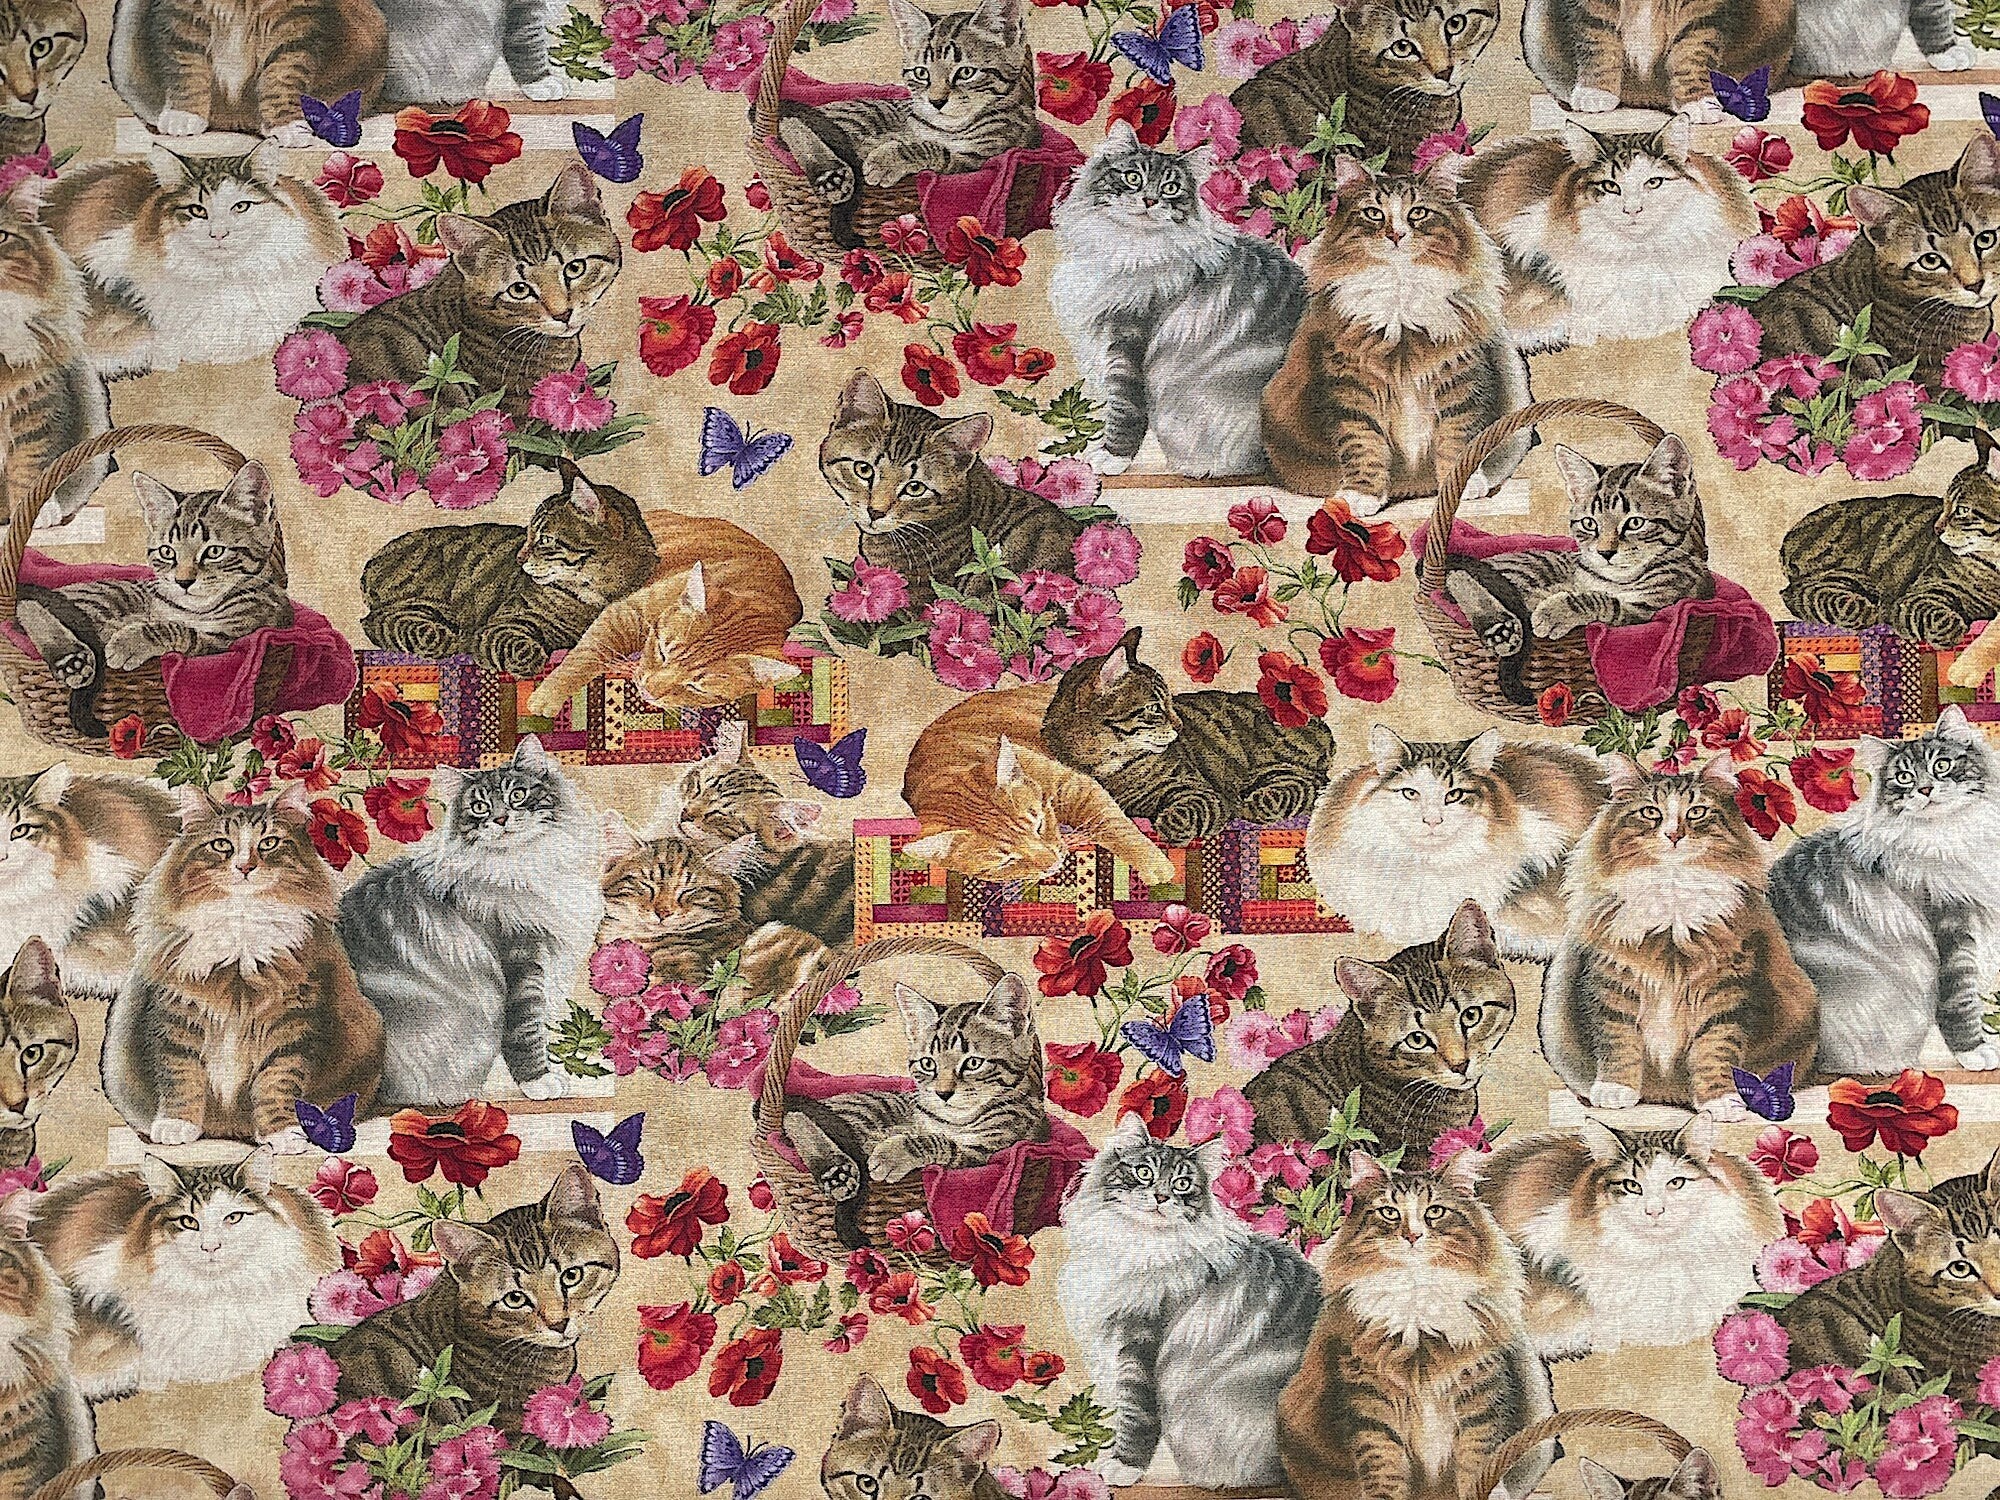 This fabric is covered with cats on shelves, cats in baskets, cats on quilts and cats surrounded by flowers. the background is beige. Francien Van Westerling designed this fabric which is part of the Cats & Quilts collection